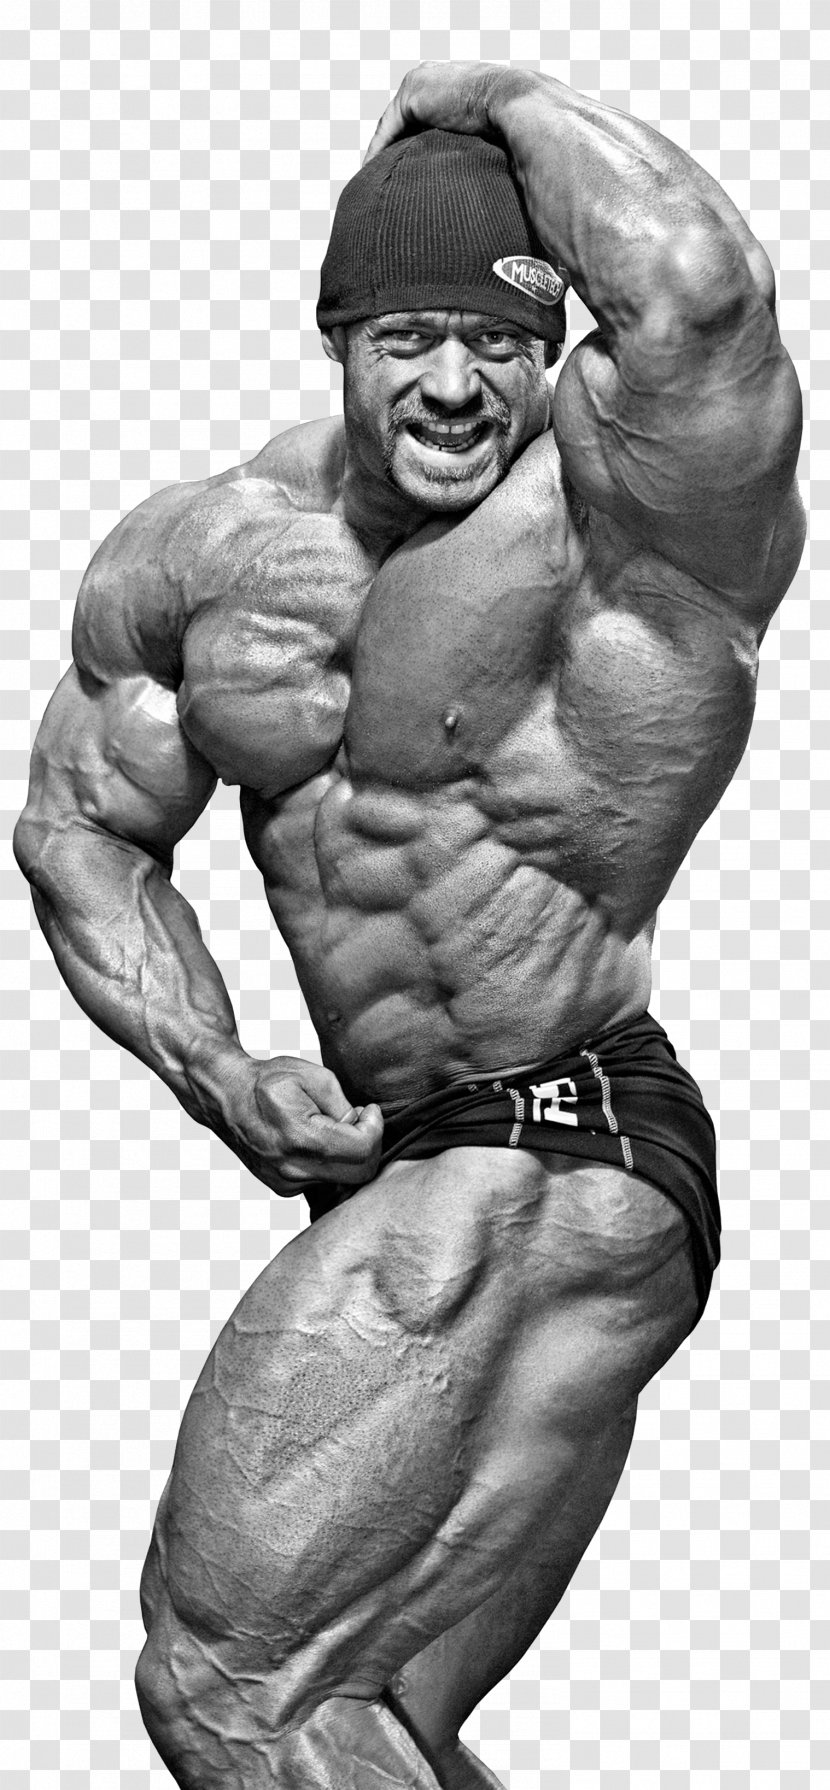 Branch Warren Mr. Olympia International Federation Of BodyBuilding & Fitness Physical Exercise - Cartoon - Bodybuilding Transparent Image Transparent PNG